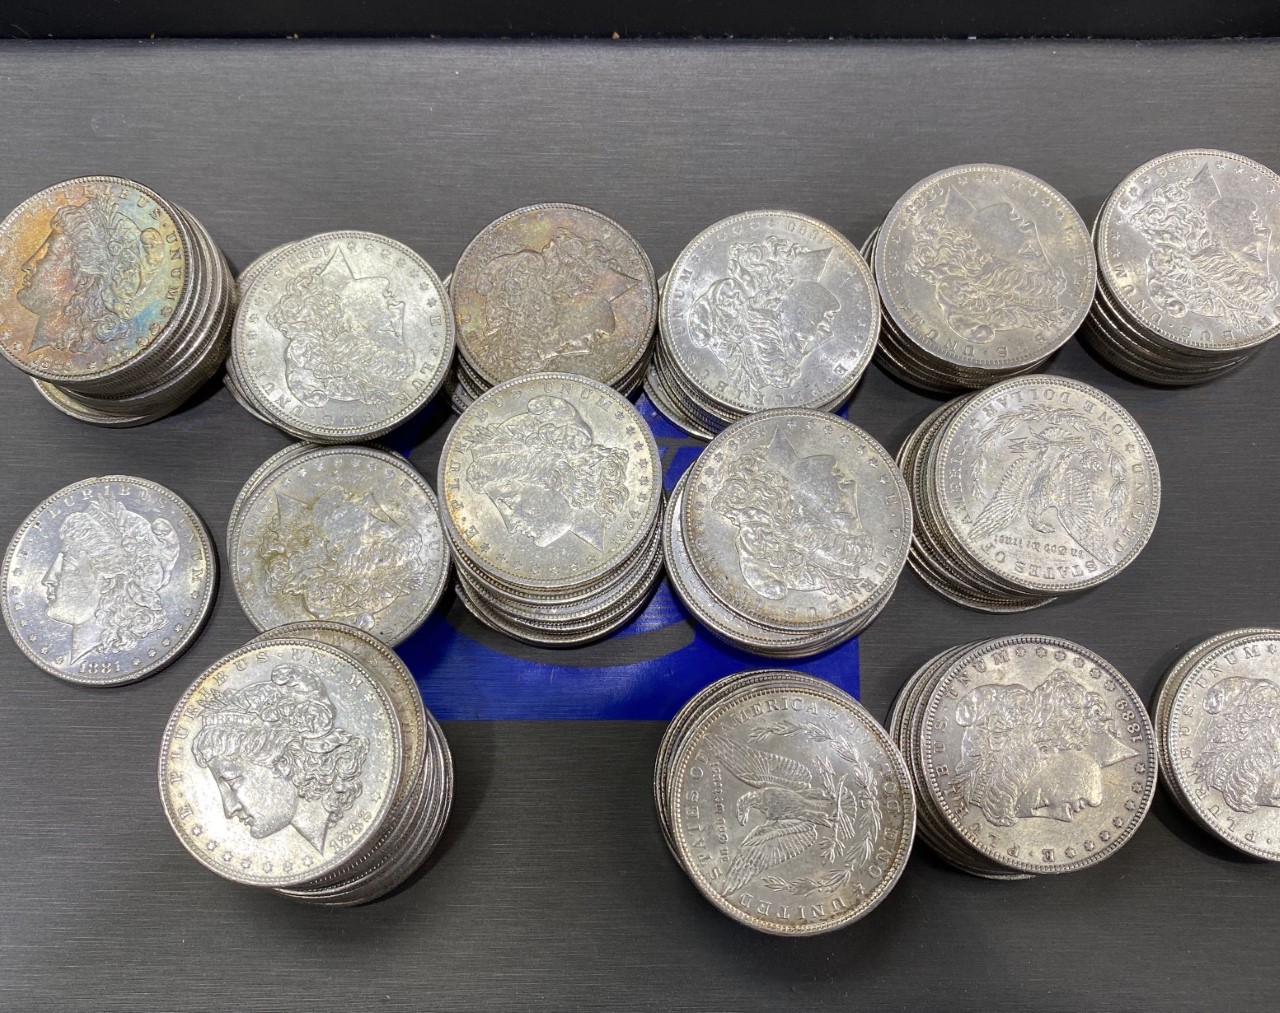 Purchased a stack of Morgan Silver Dollars. We are always buying and selling coins. Collectors Coins & Jewelry Lynbrook (516)341-7355